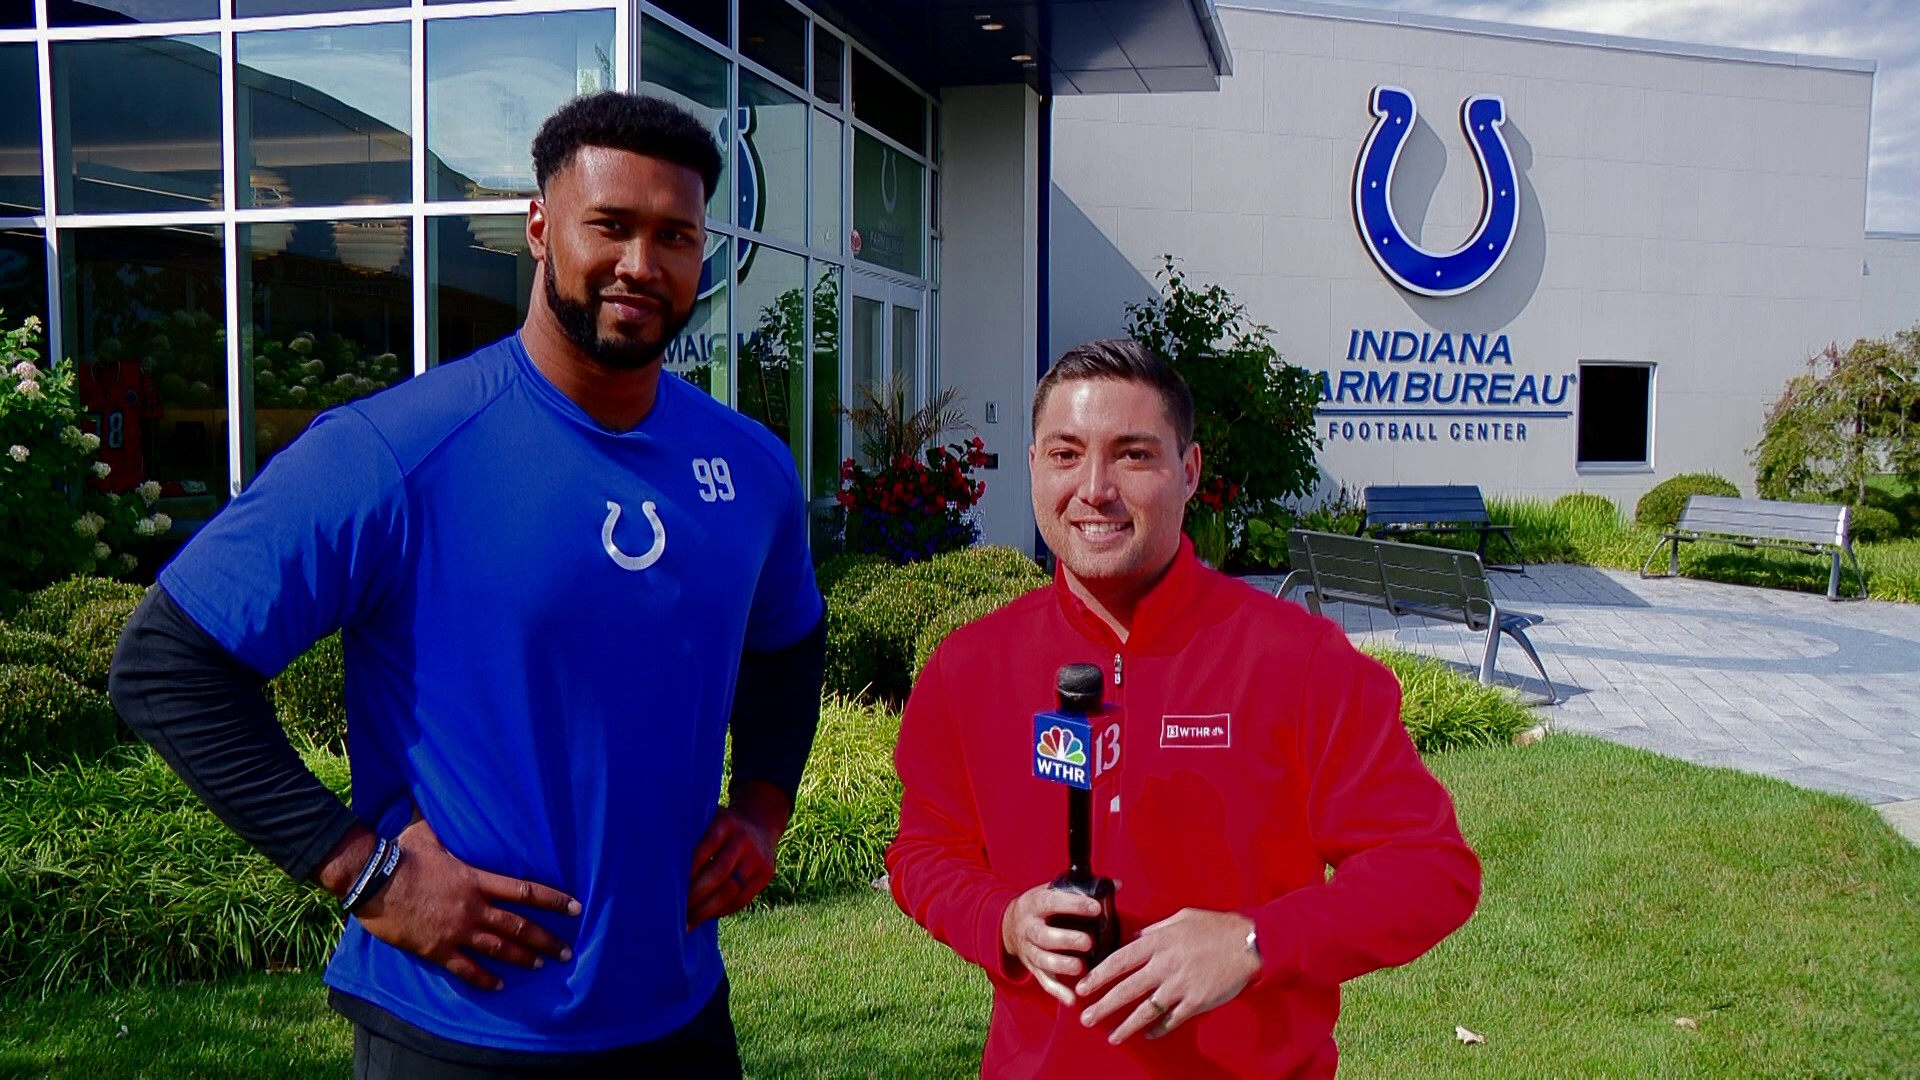 13Sports reporter Dominic Miranda and Colts defensive end DeForest Buckner discuss last week's game against the Titans and look ahead to this weekend's Jaguars game.